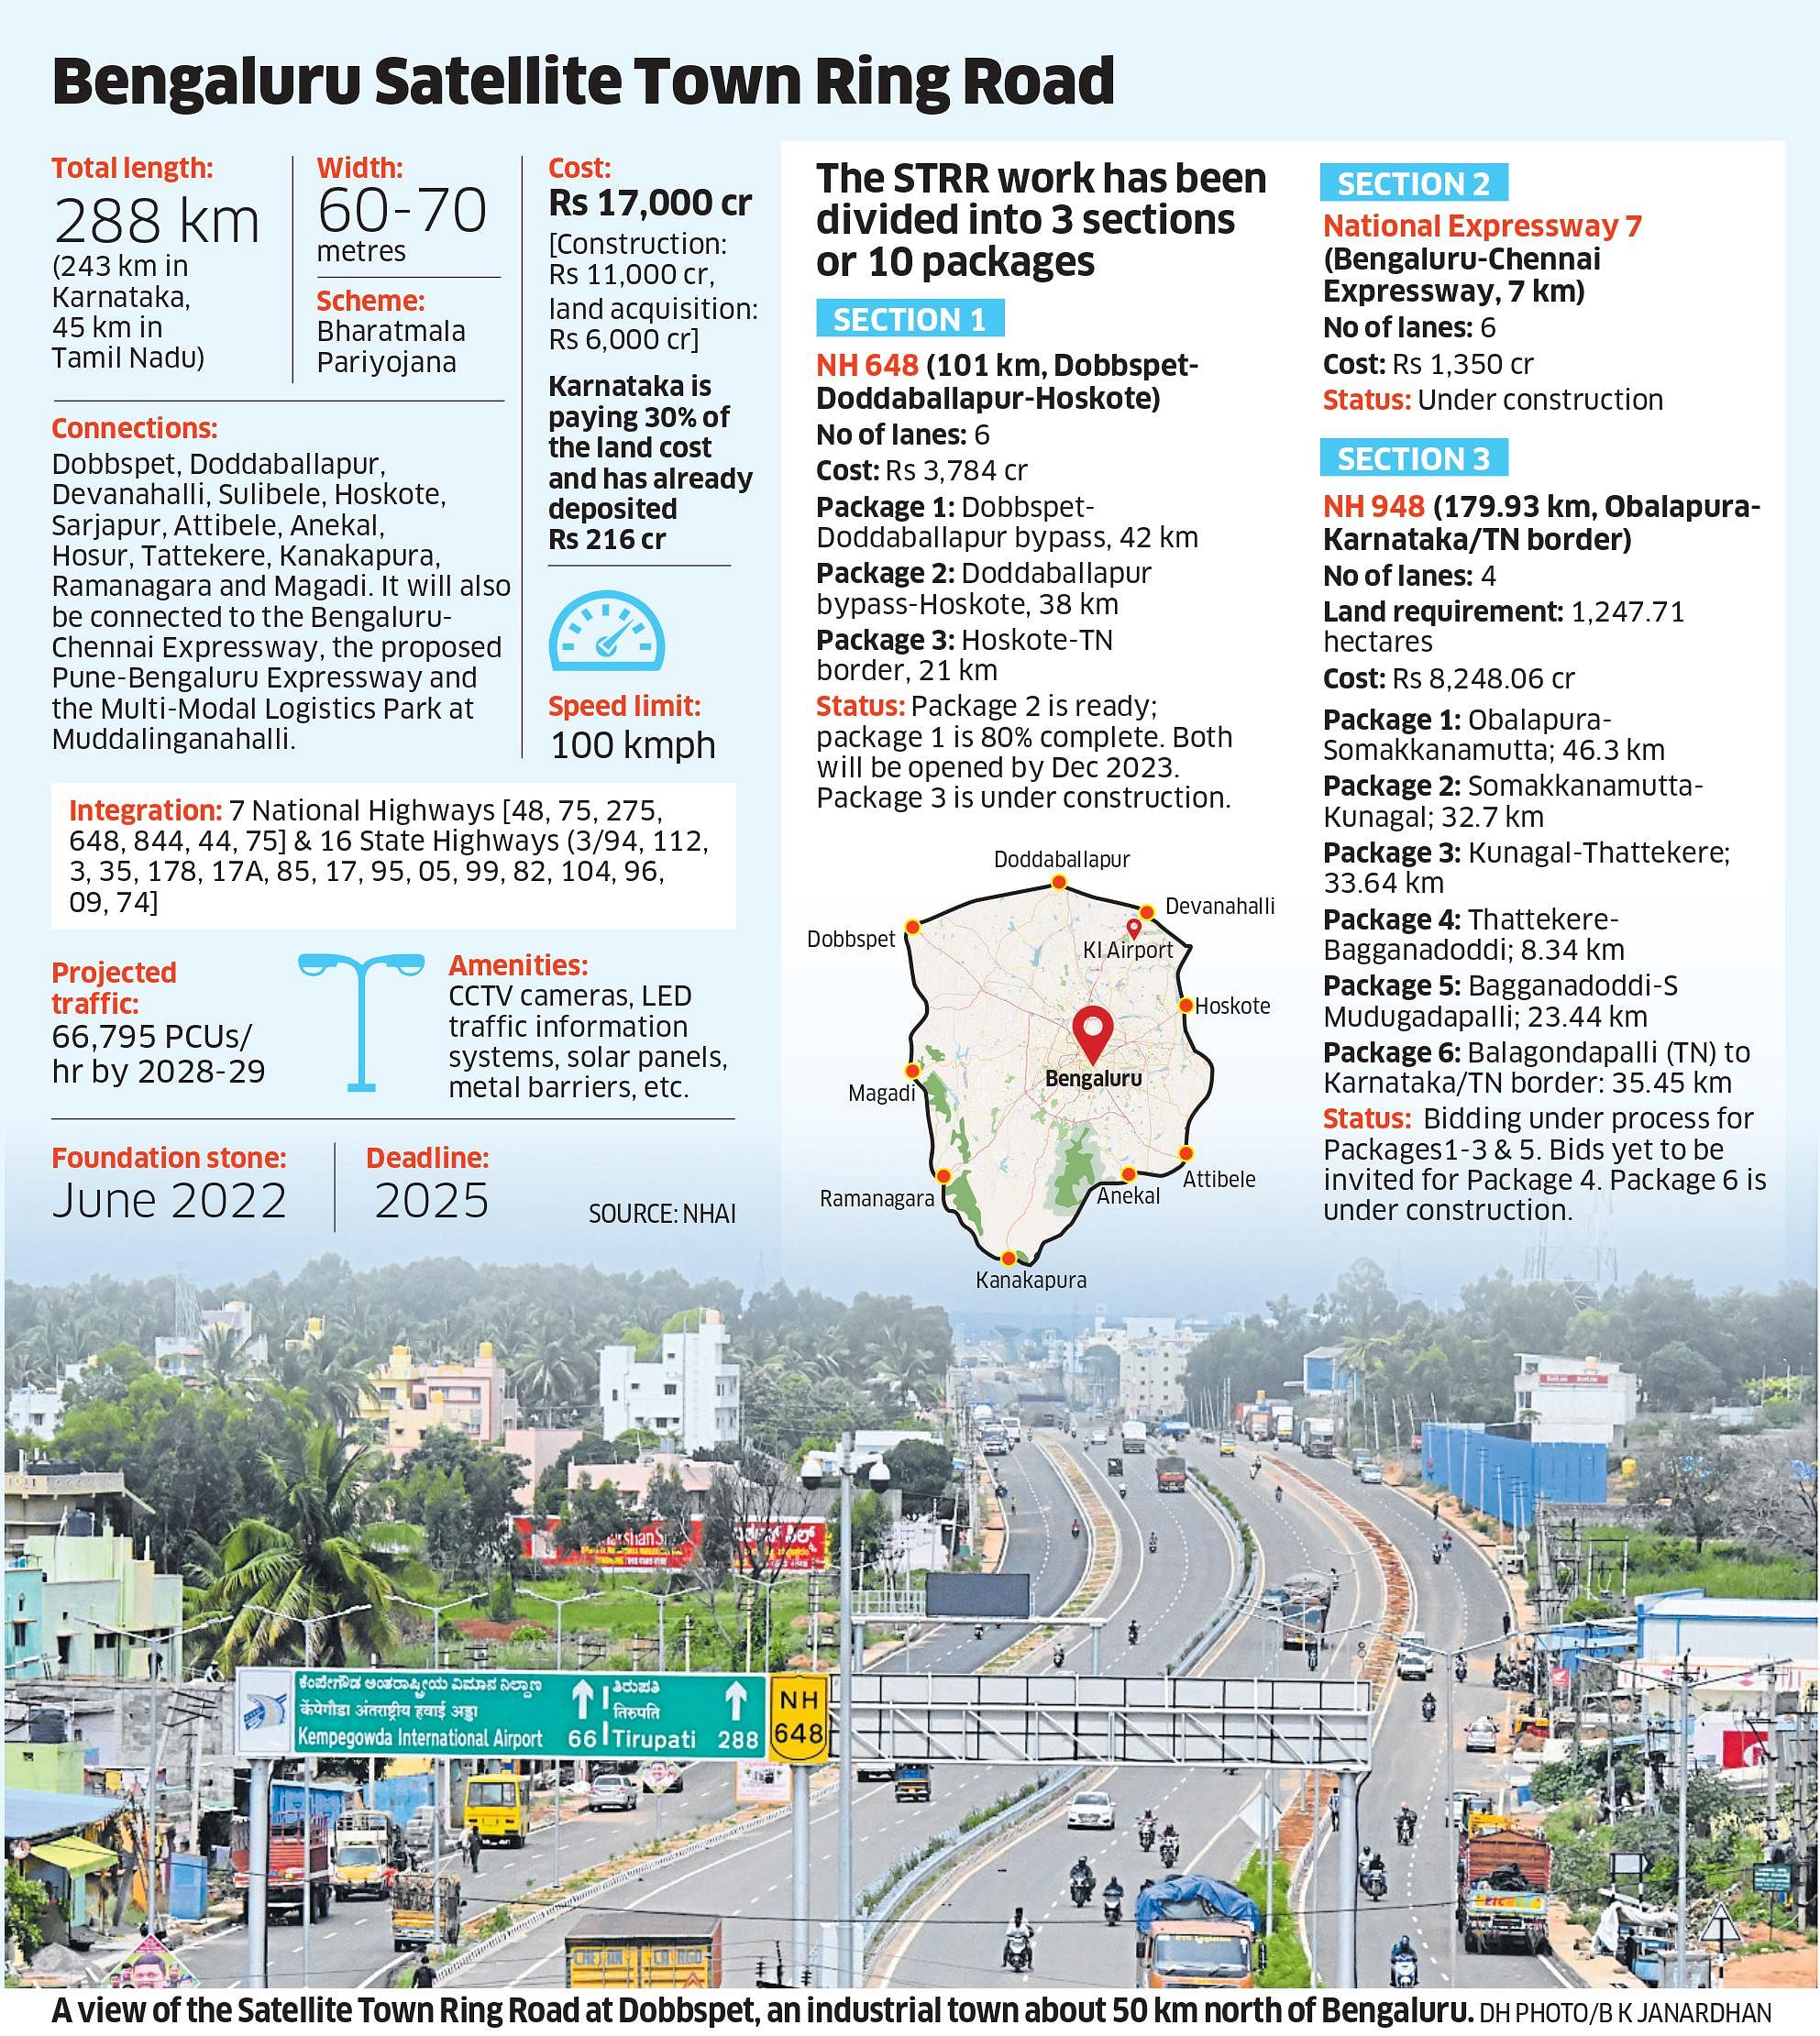 Coming soon: South India's largest Multimodal Logistics Park in Bengaluru